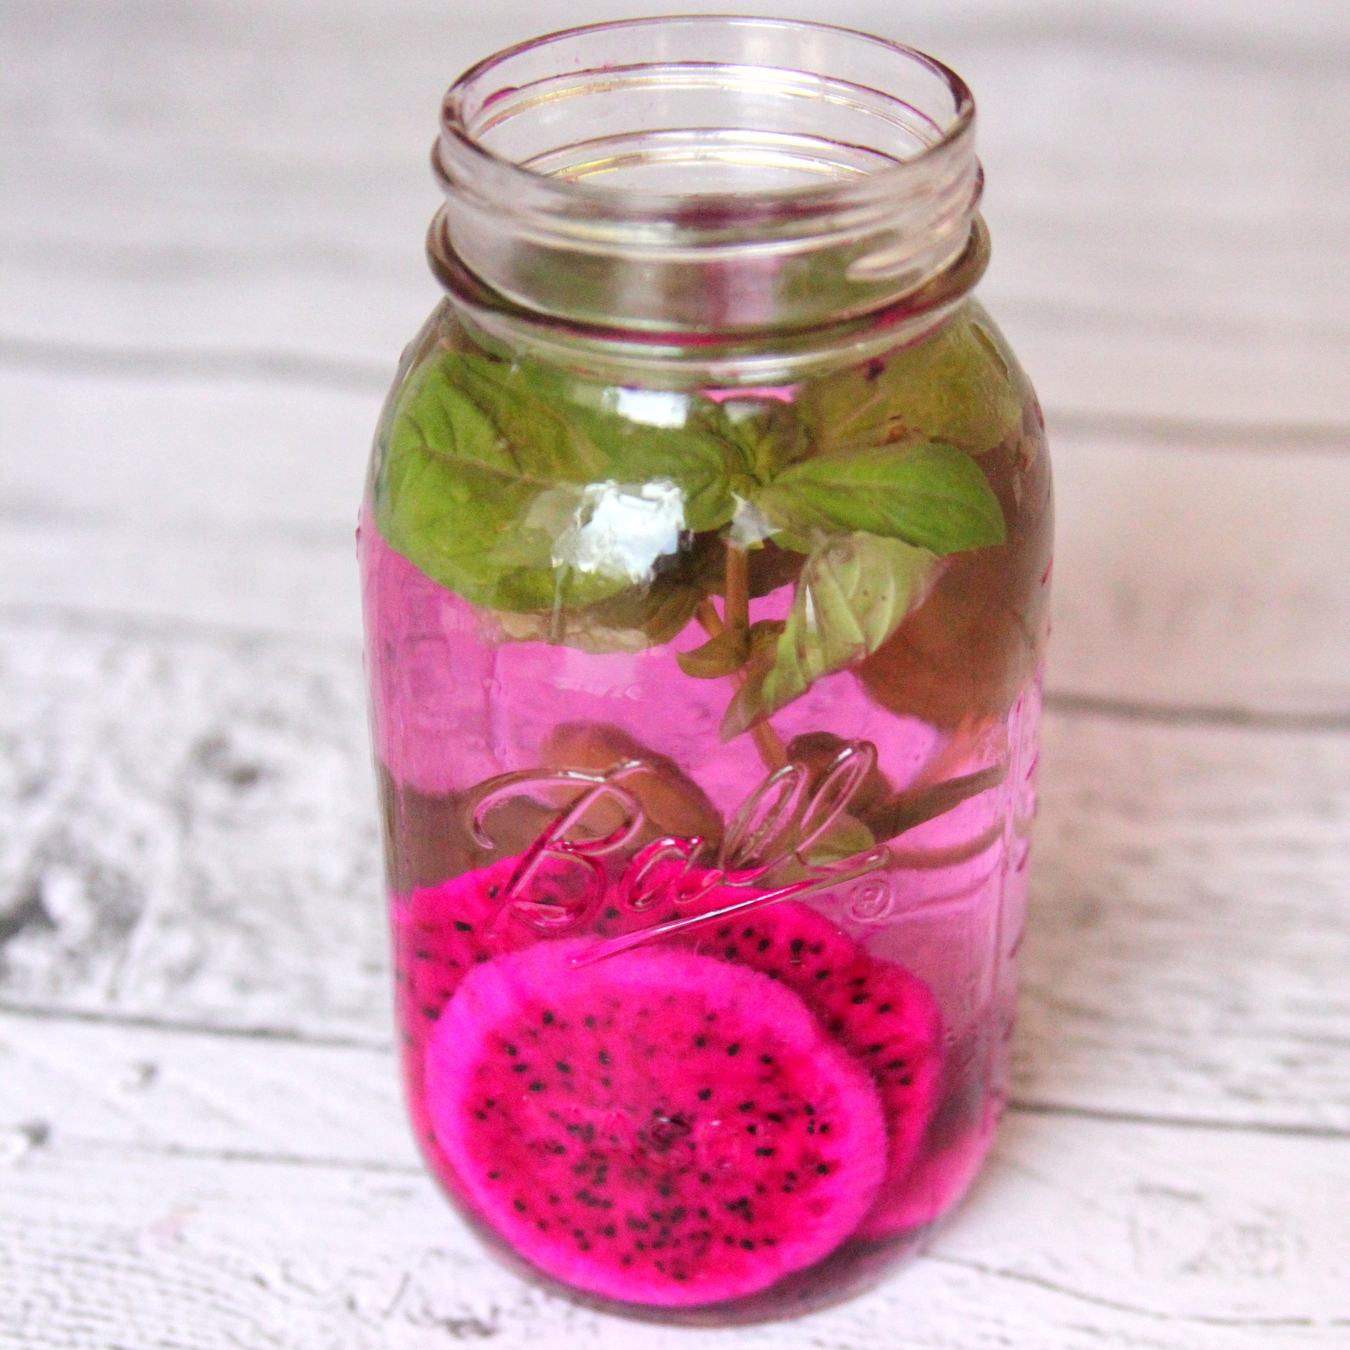 detox water recipes (how pretty is that dragon fruit?)